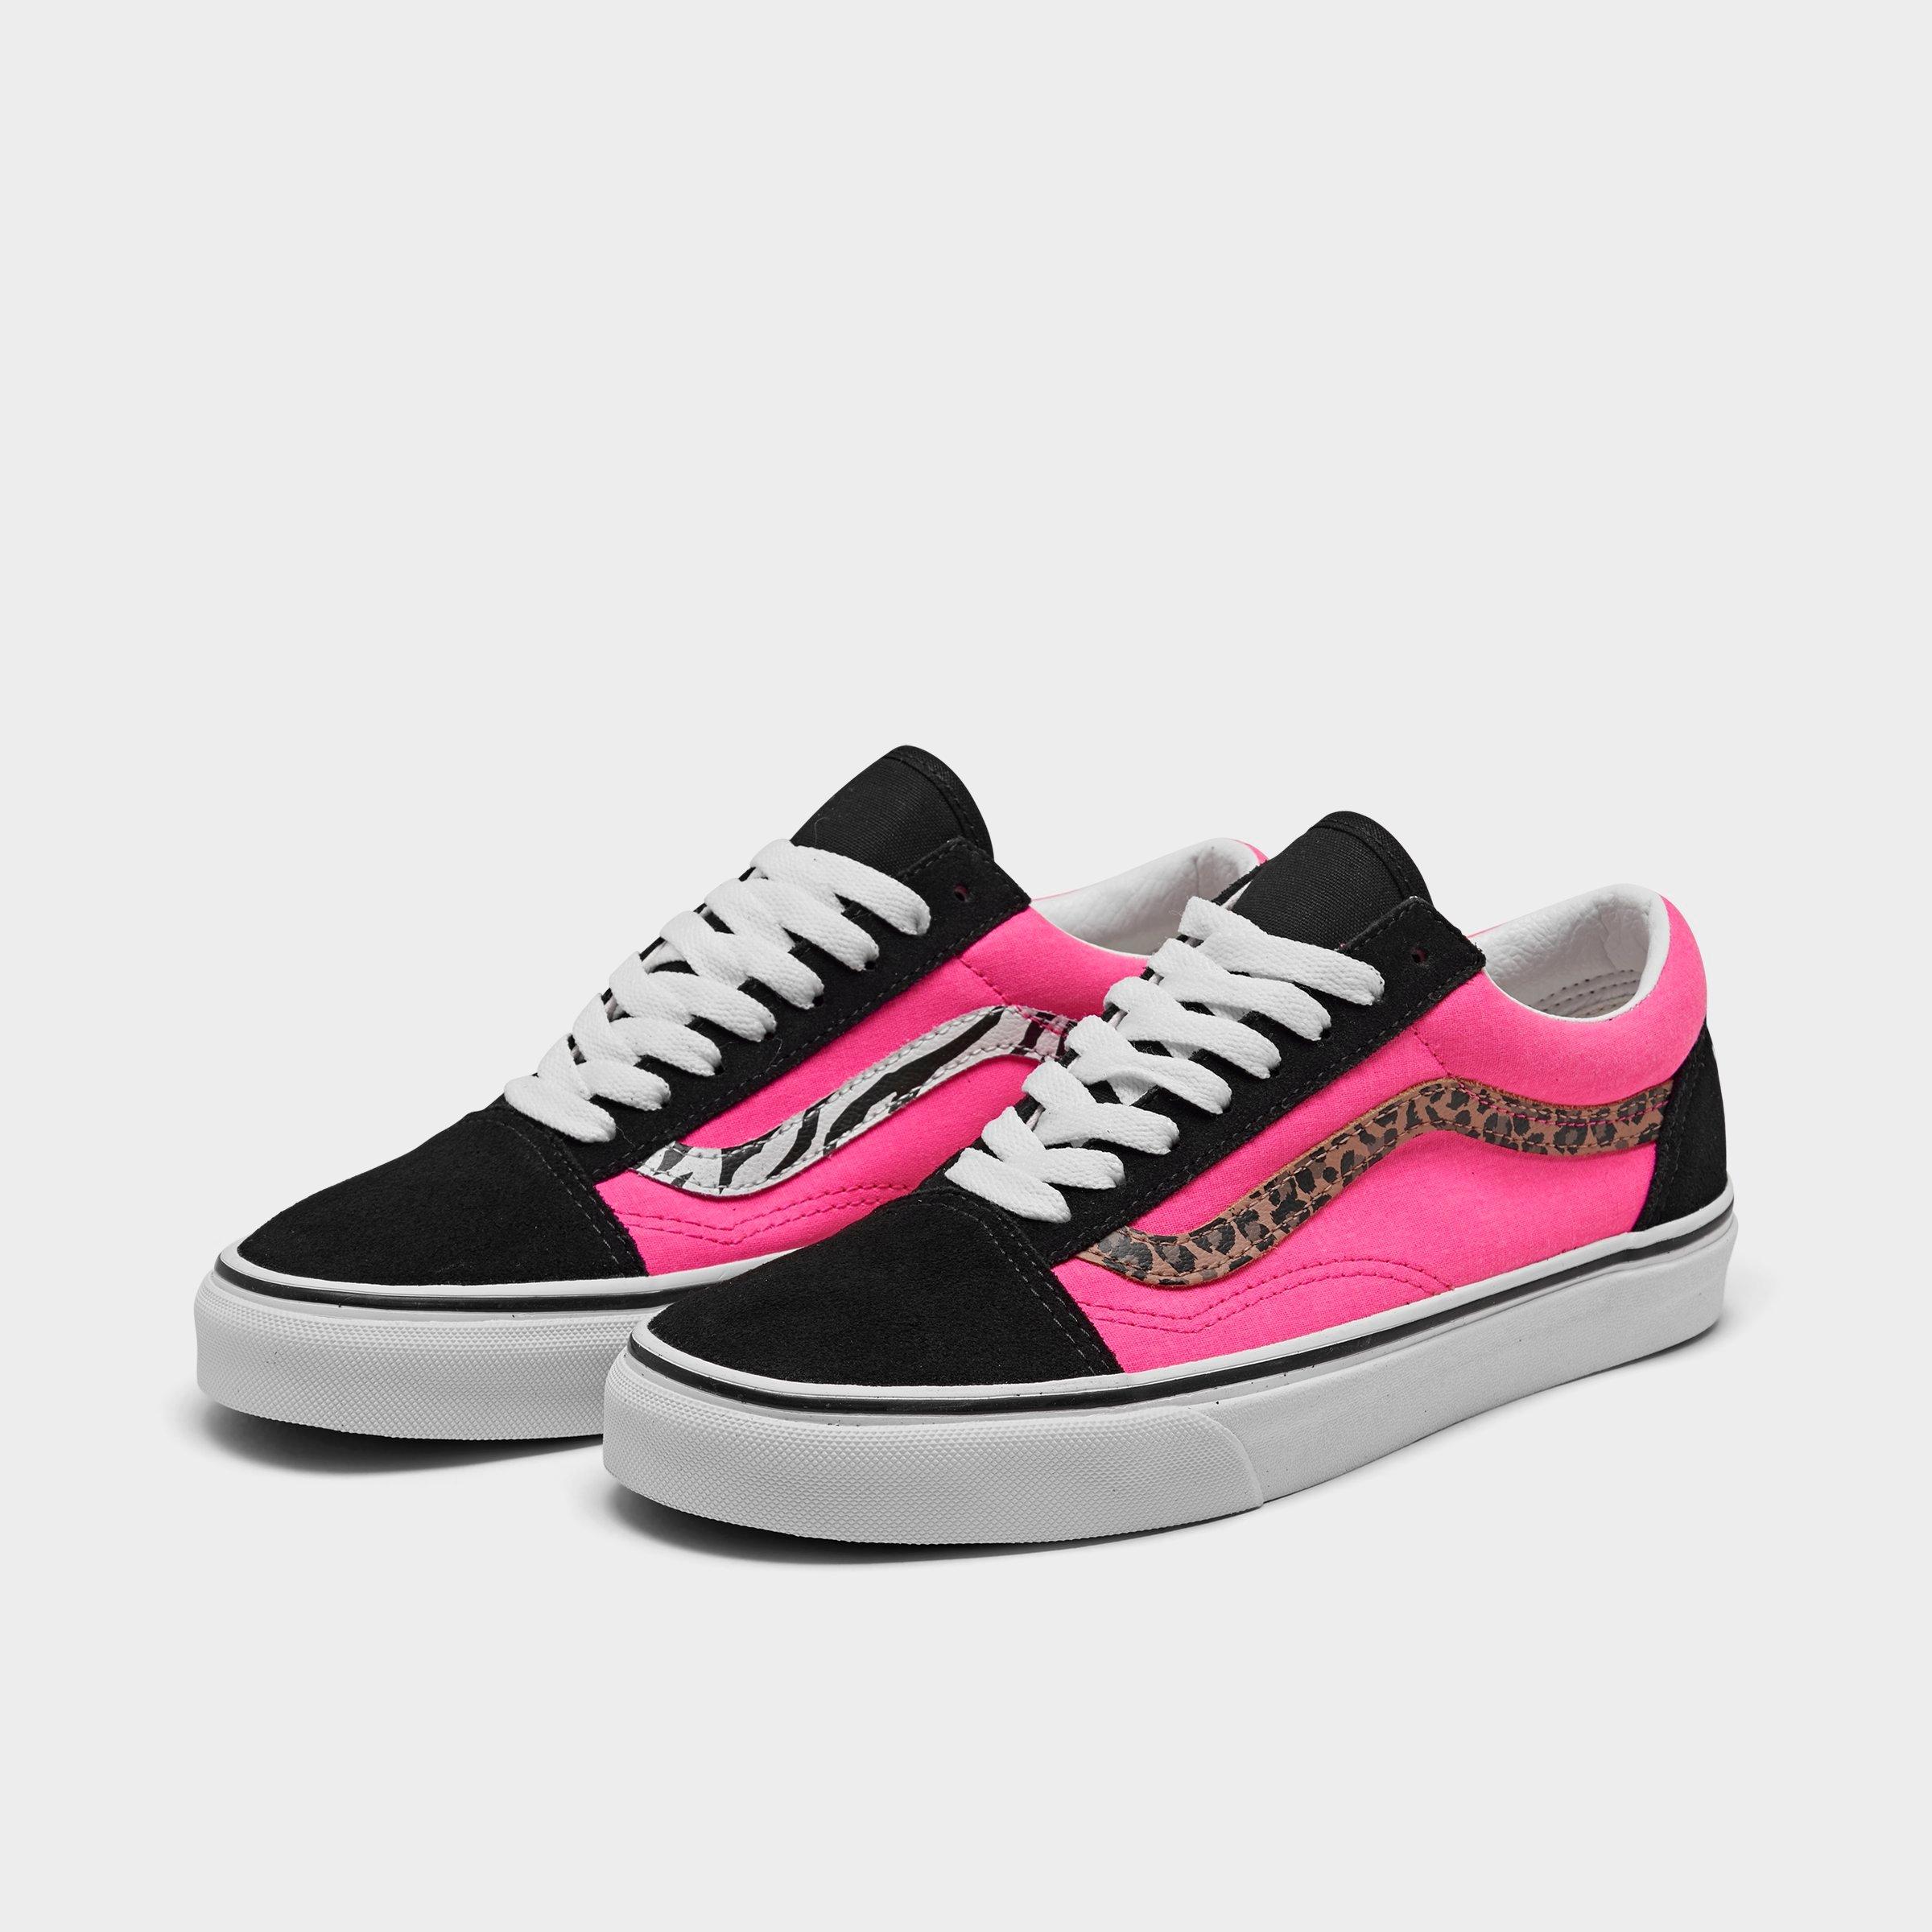 vans shoes pink and black